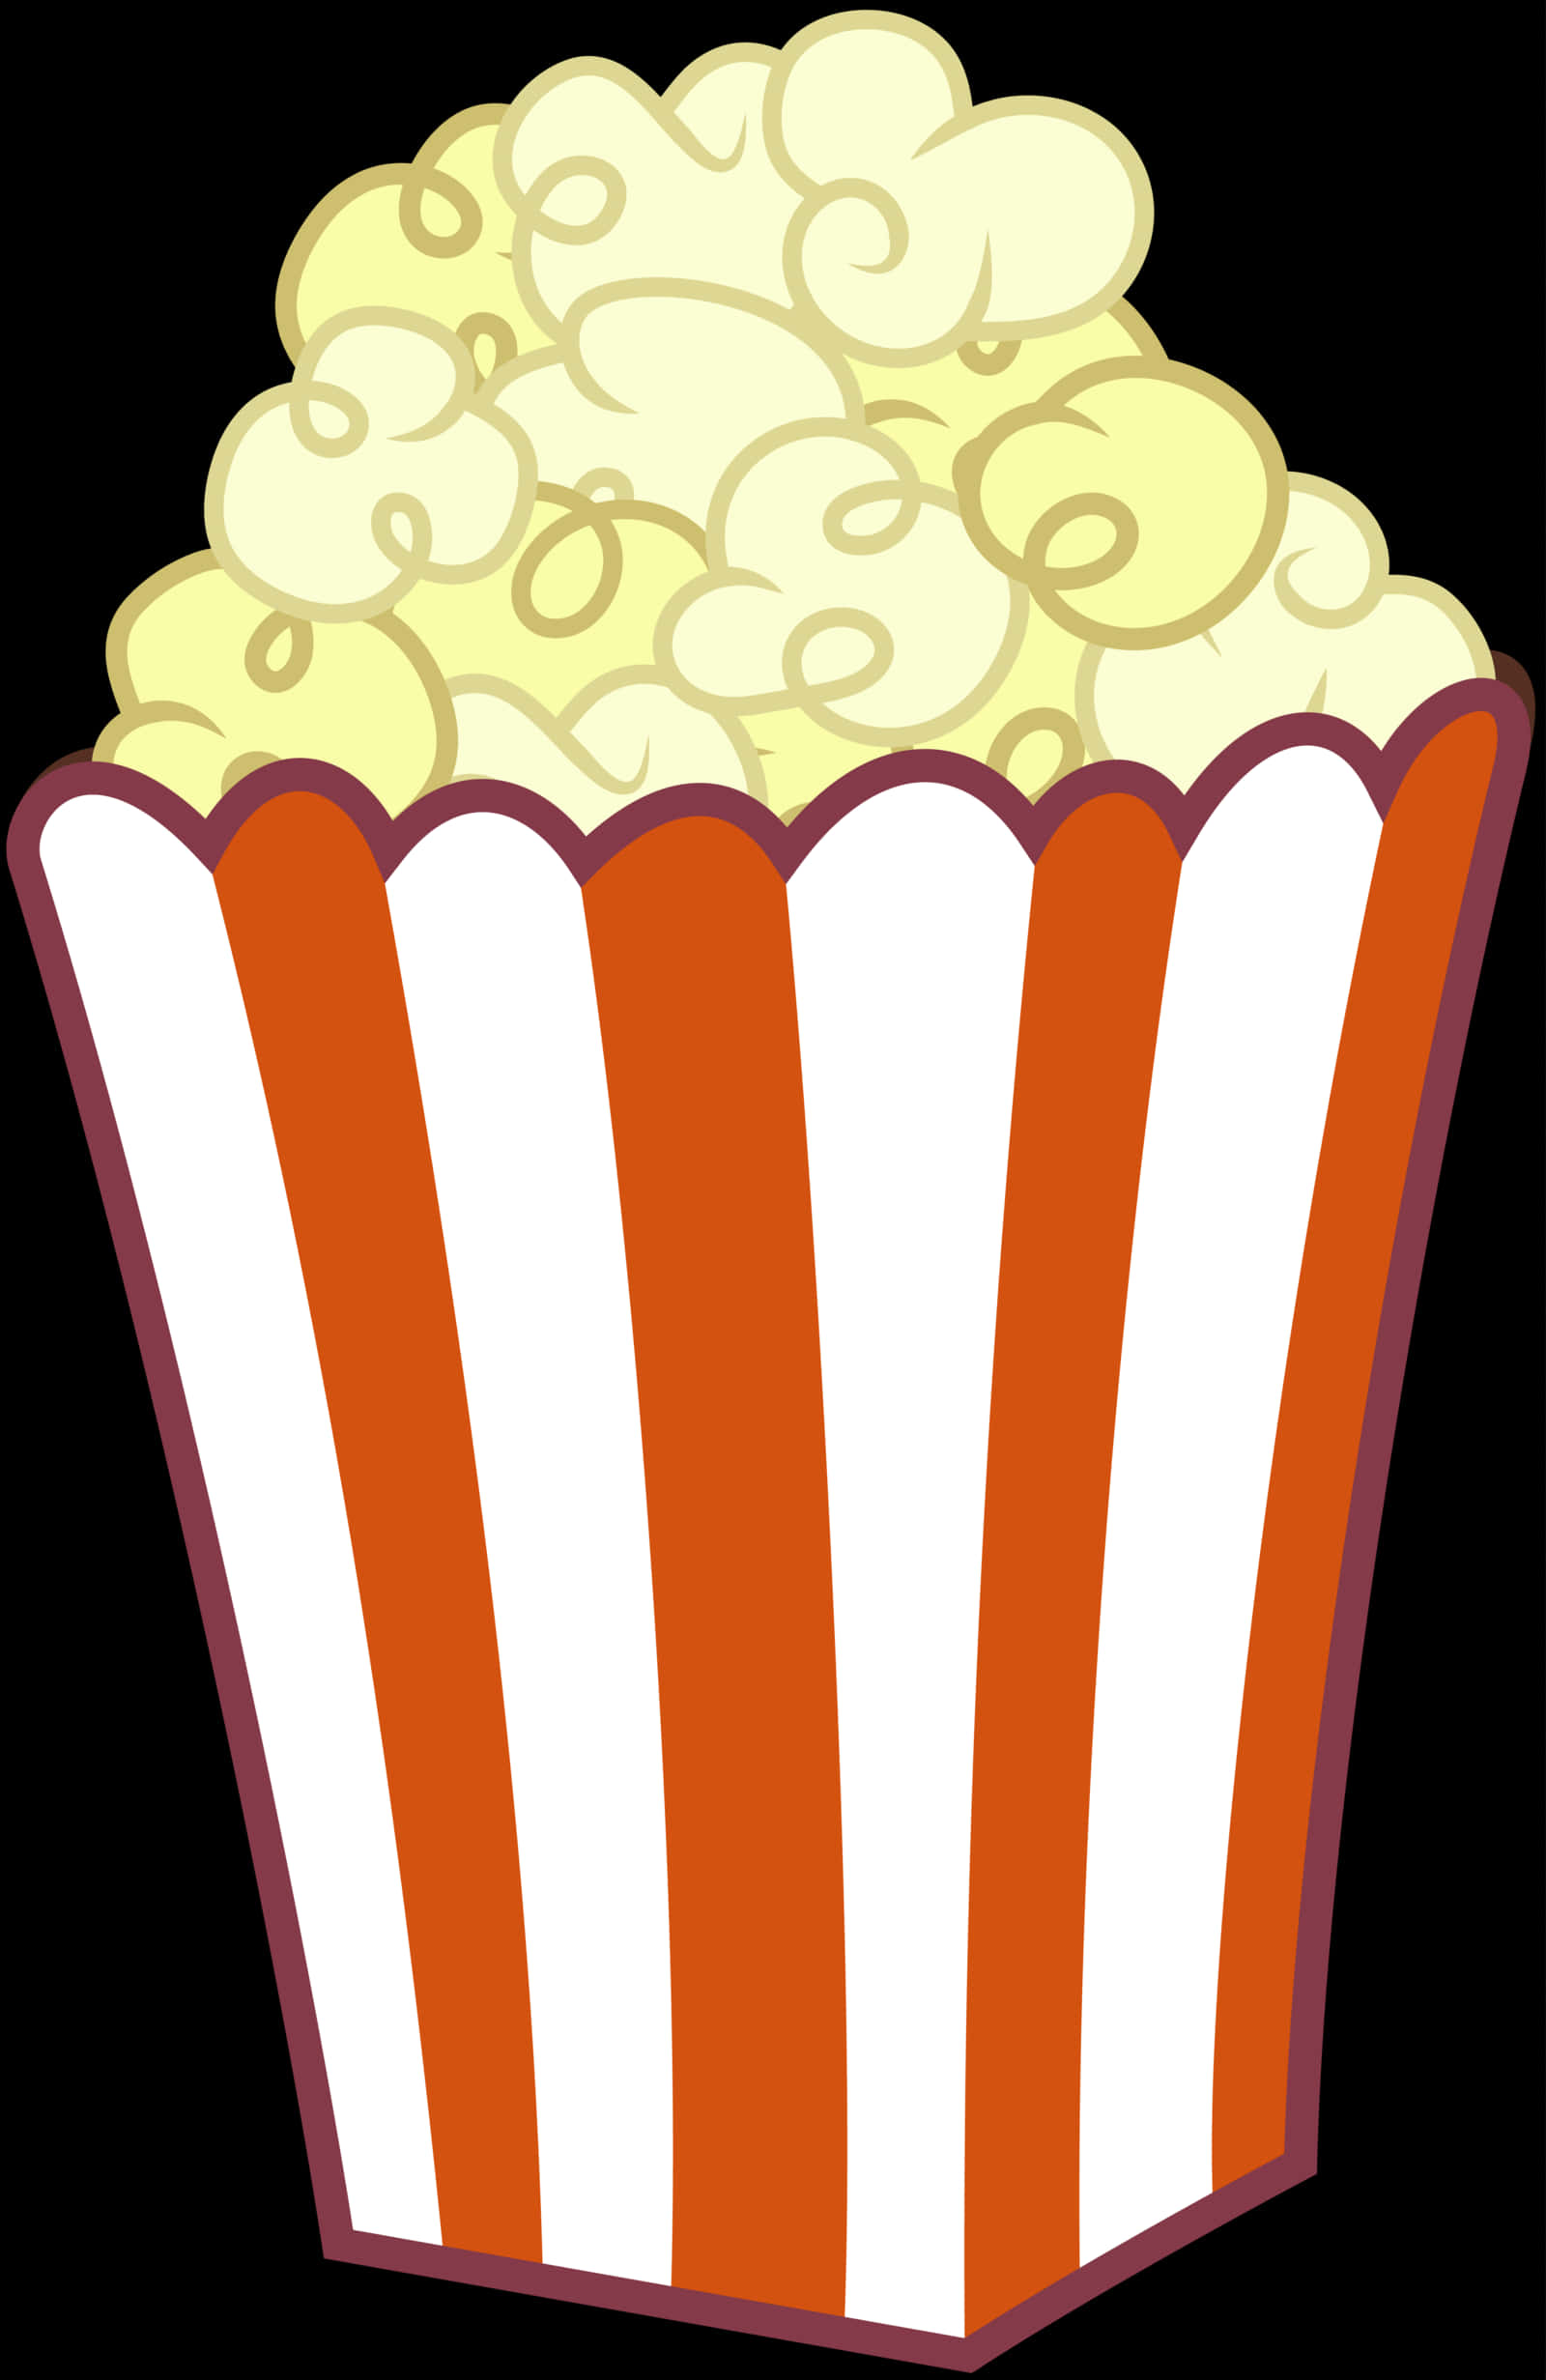 A Cartoon Of Popcorn In A Striped Container